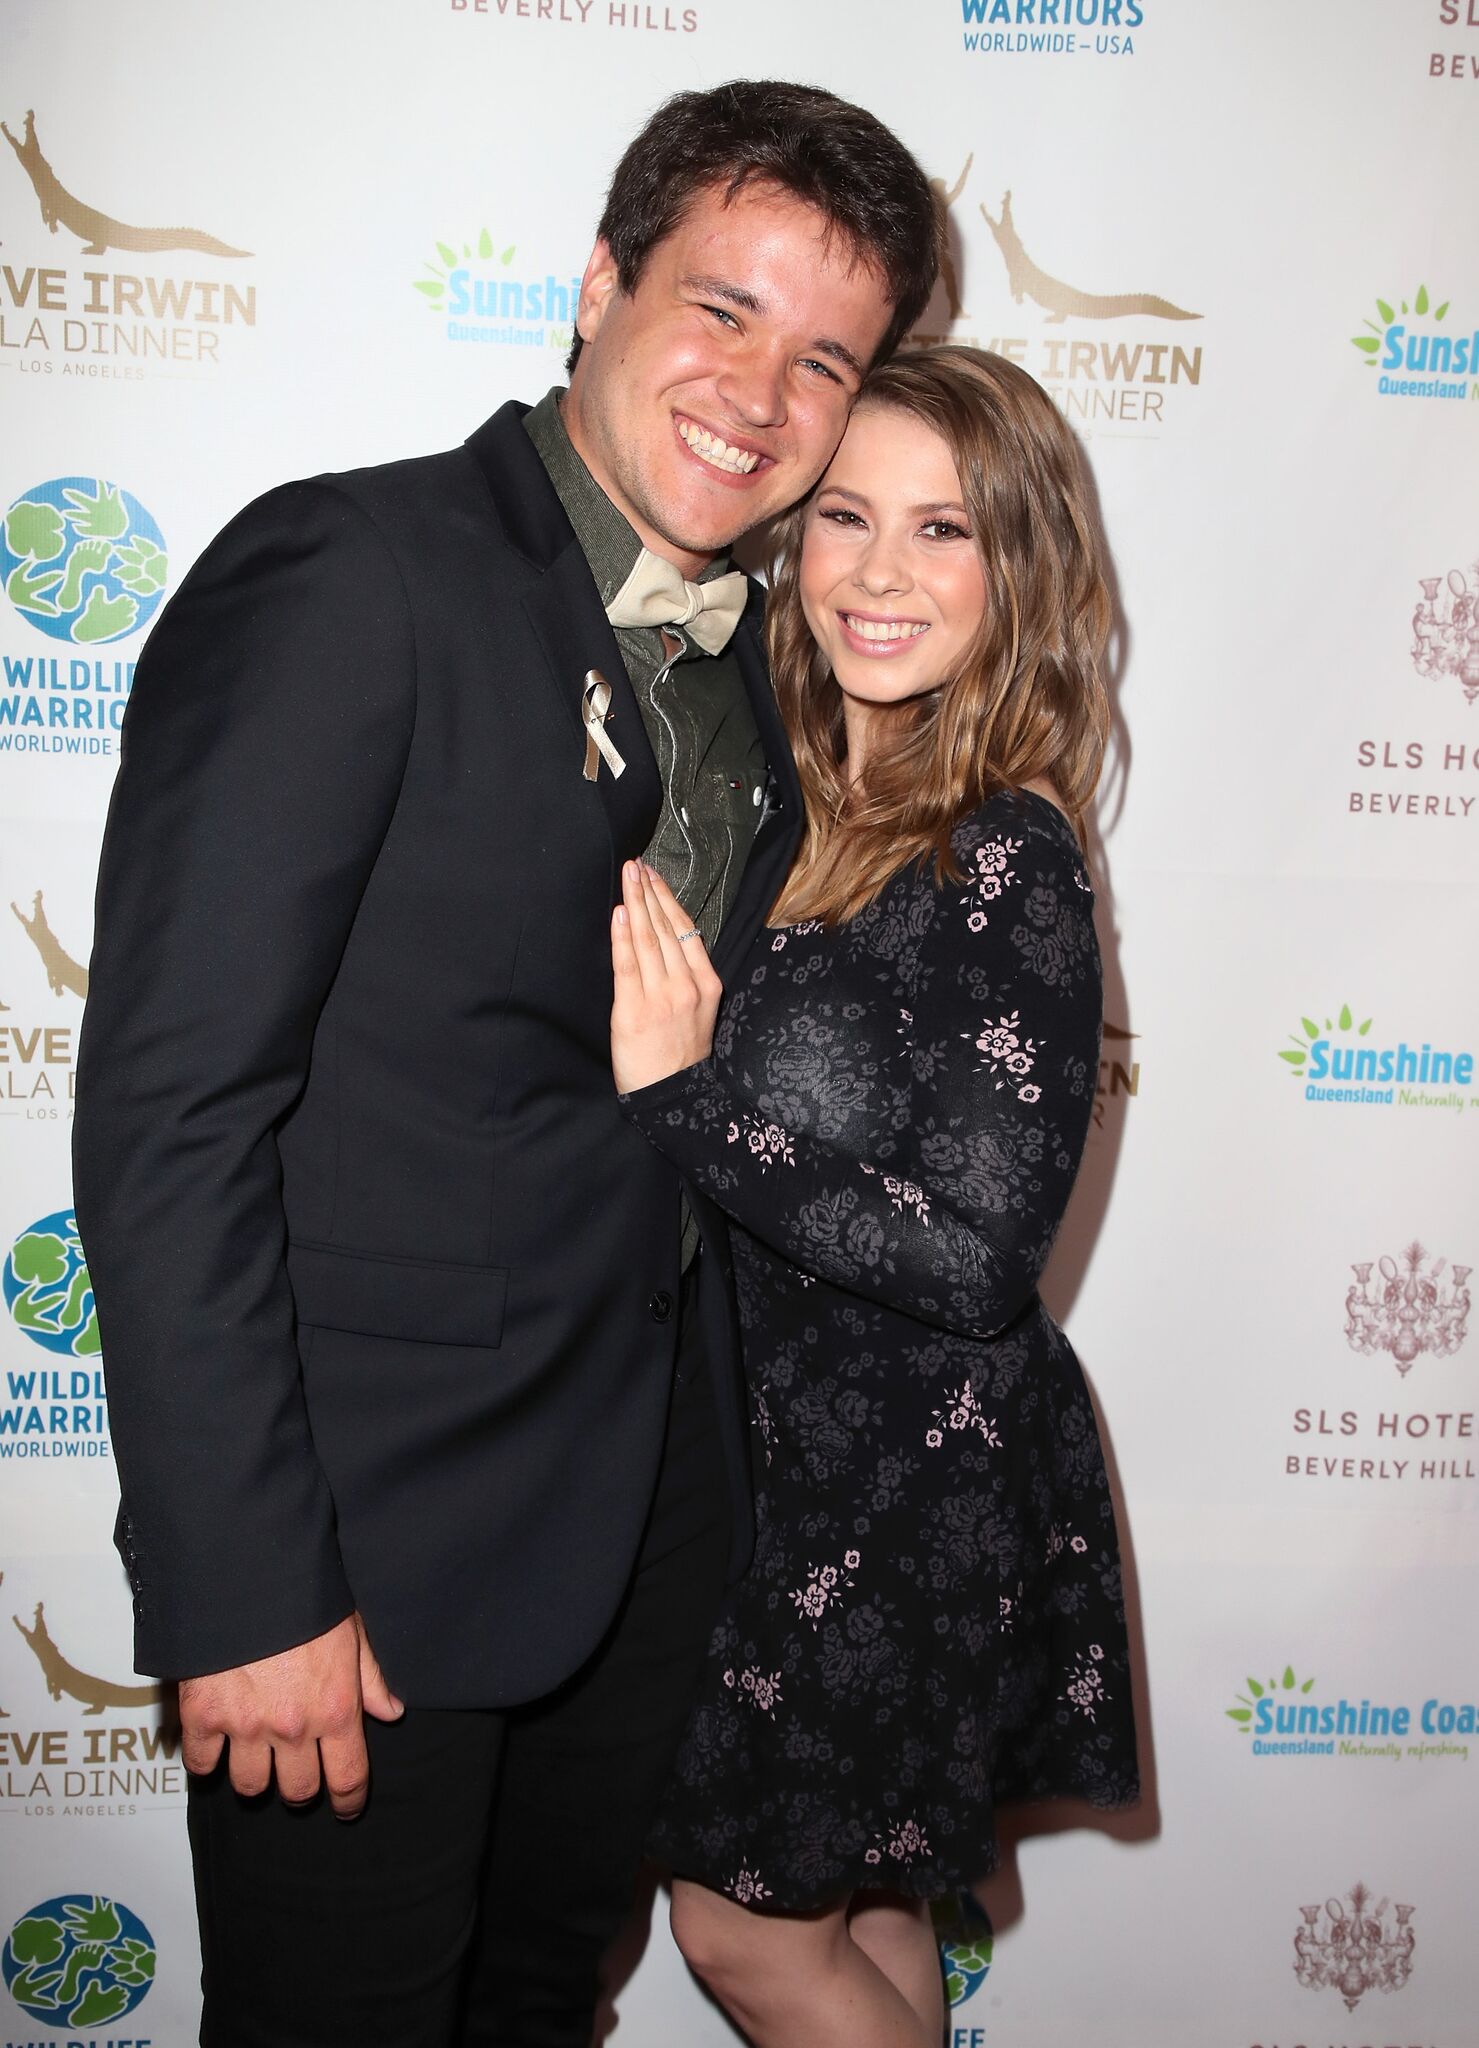 Wakeboarder Chandler Powell (L) and conservationist/TV personality Bindi Irwin attend the Steve Irwin Gala Dinner on May 05, 2018 | Photo: Getty Images